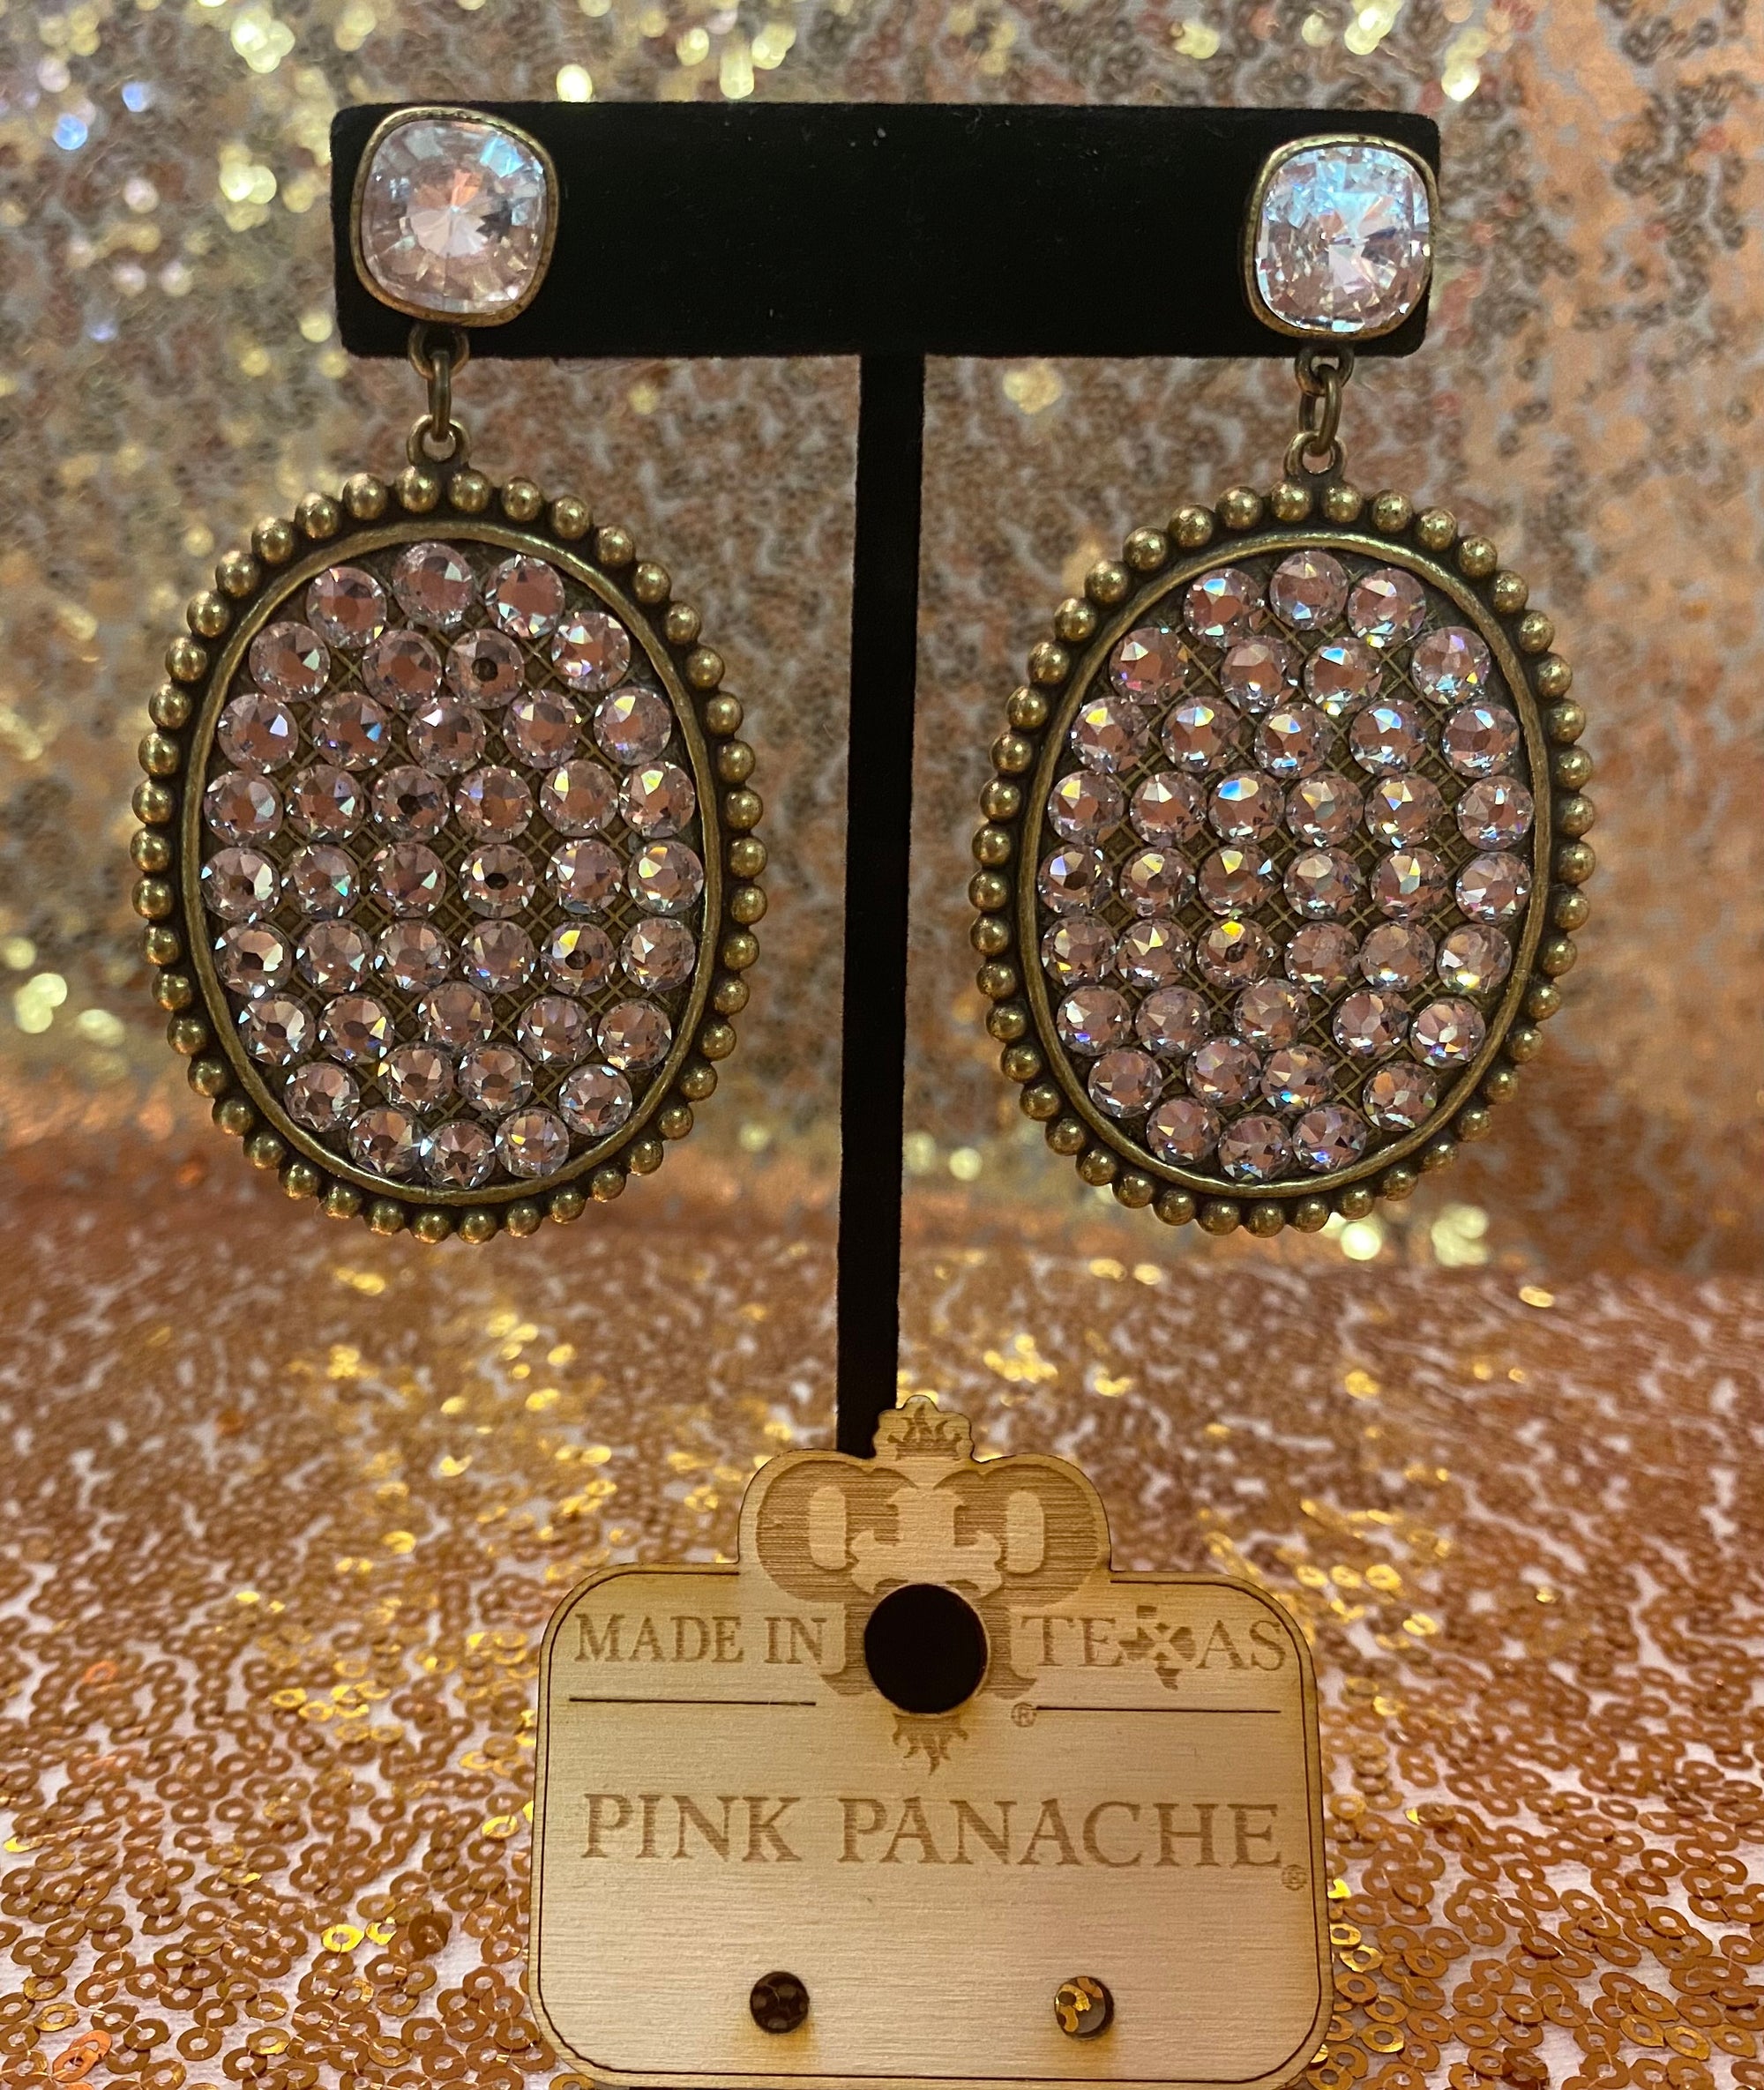 PINK PANACHE LARGE OVAL EARRINGS WITH CLEAR CRYSTALS